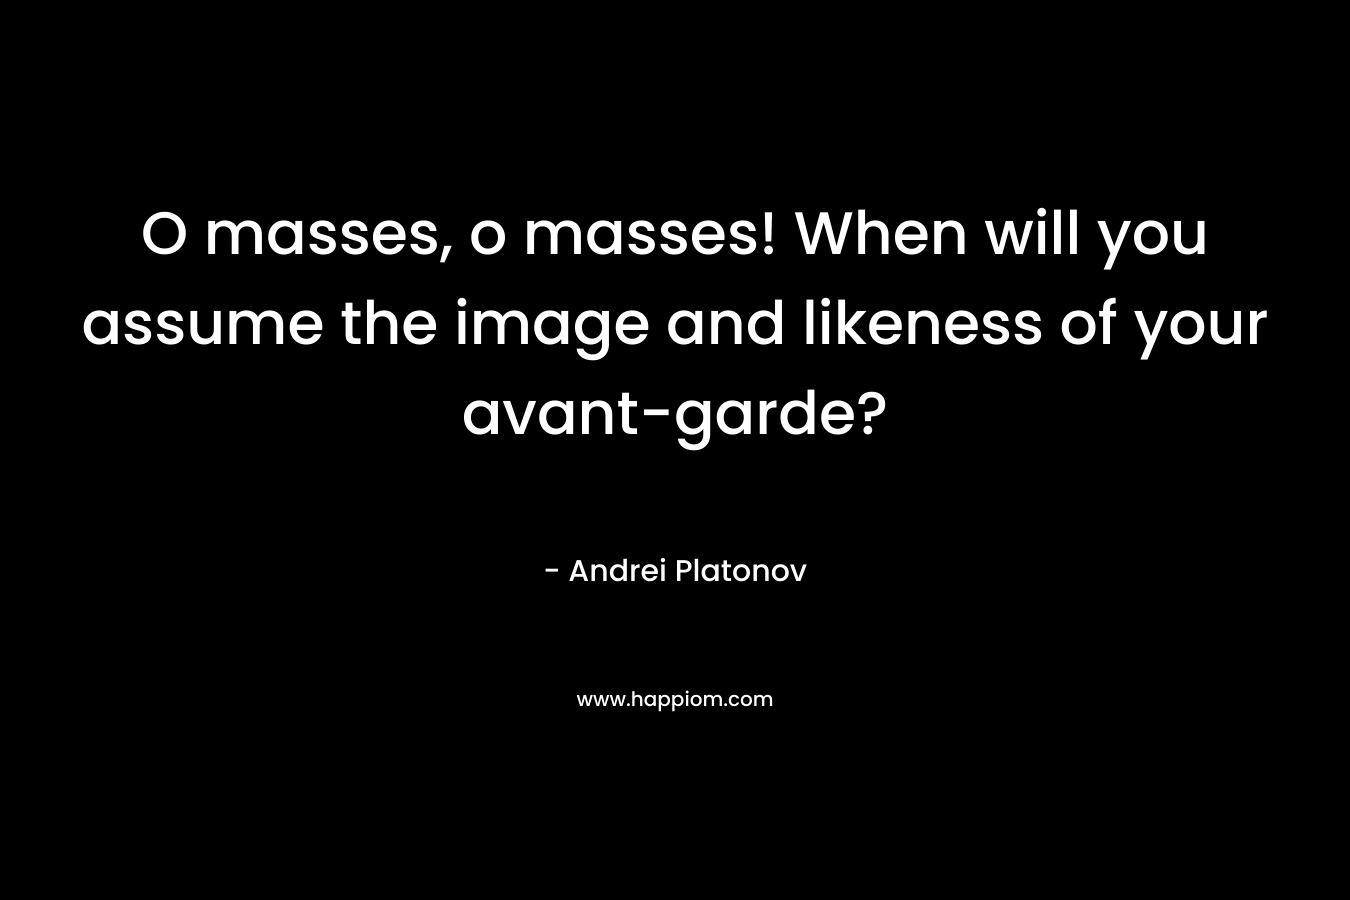 O masses, o masses! When will you assume the image and likeness of your avant-garde?